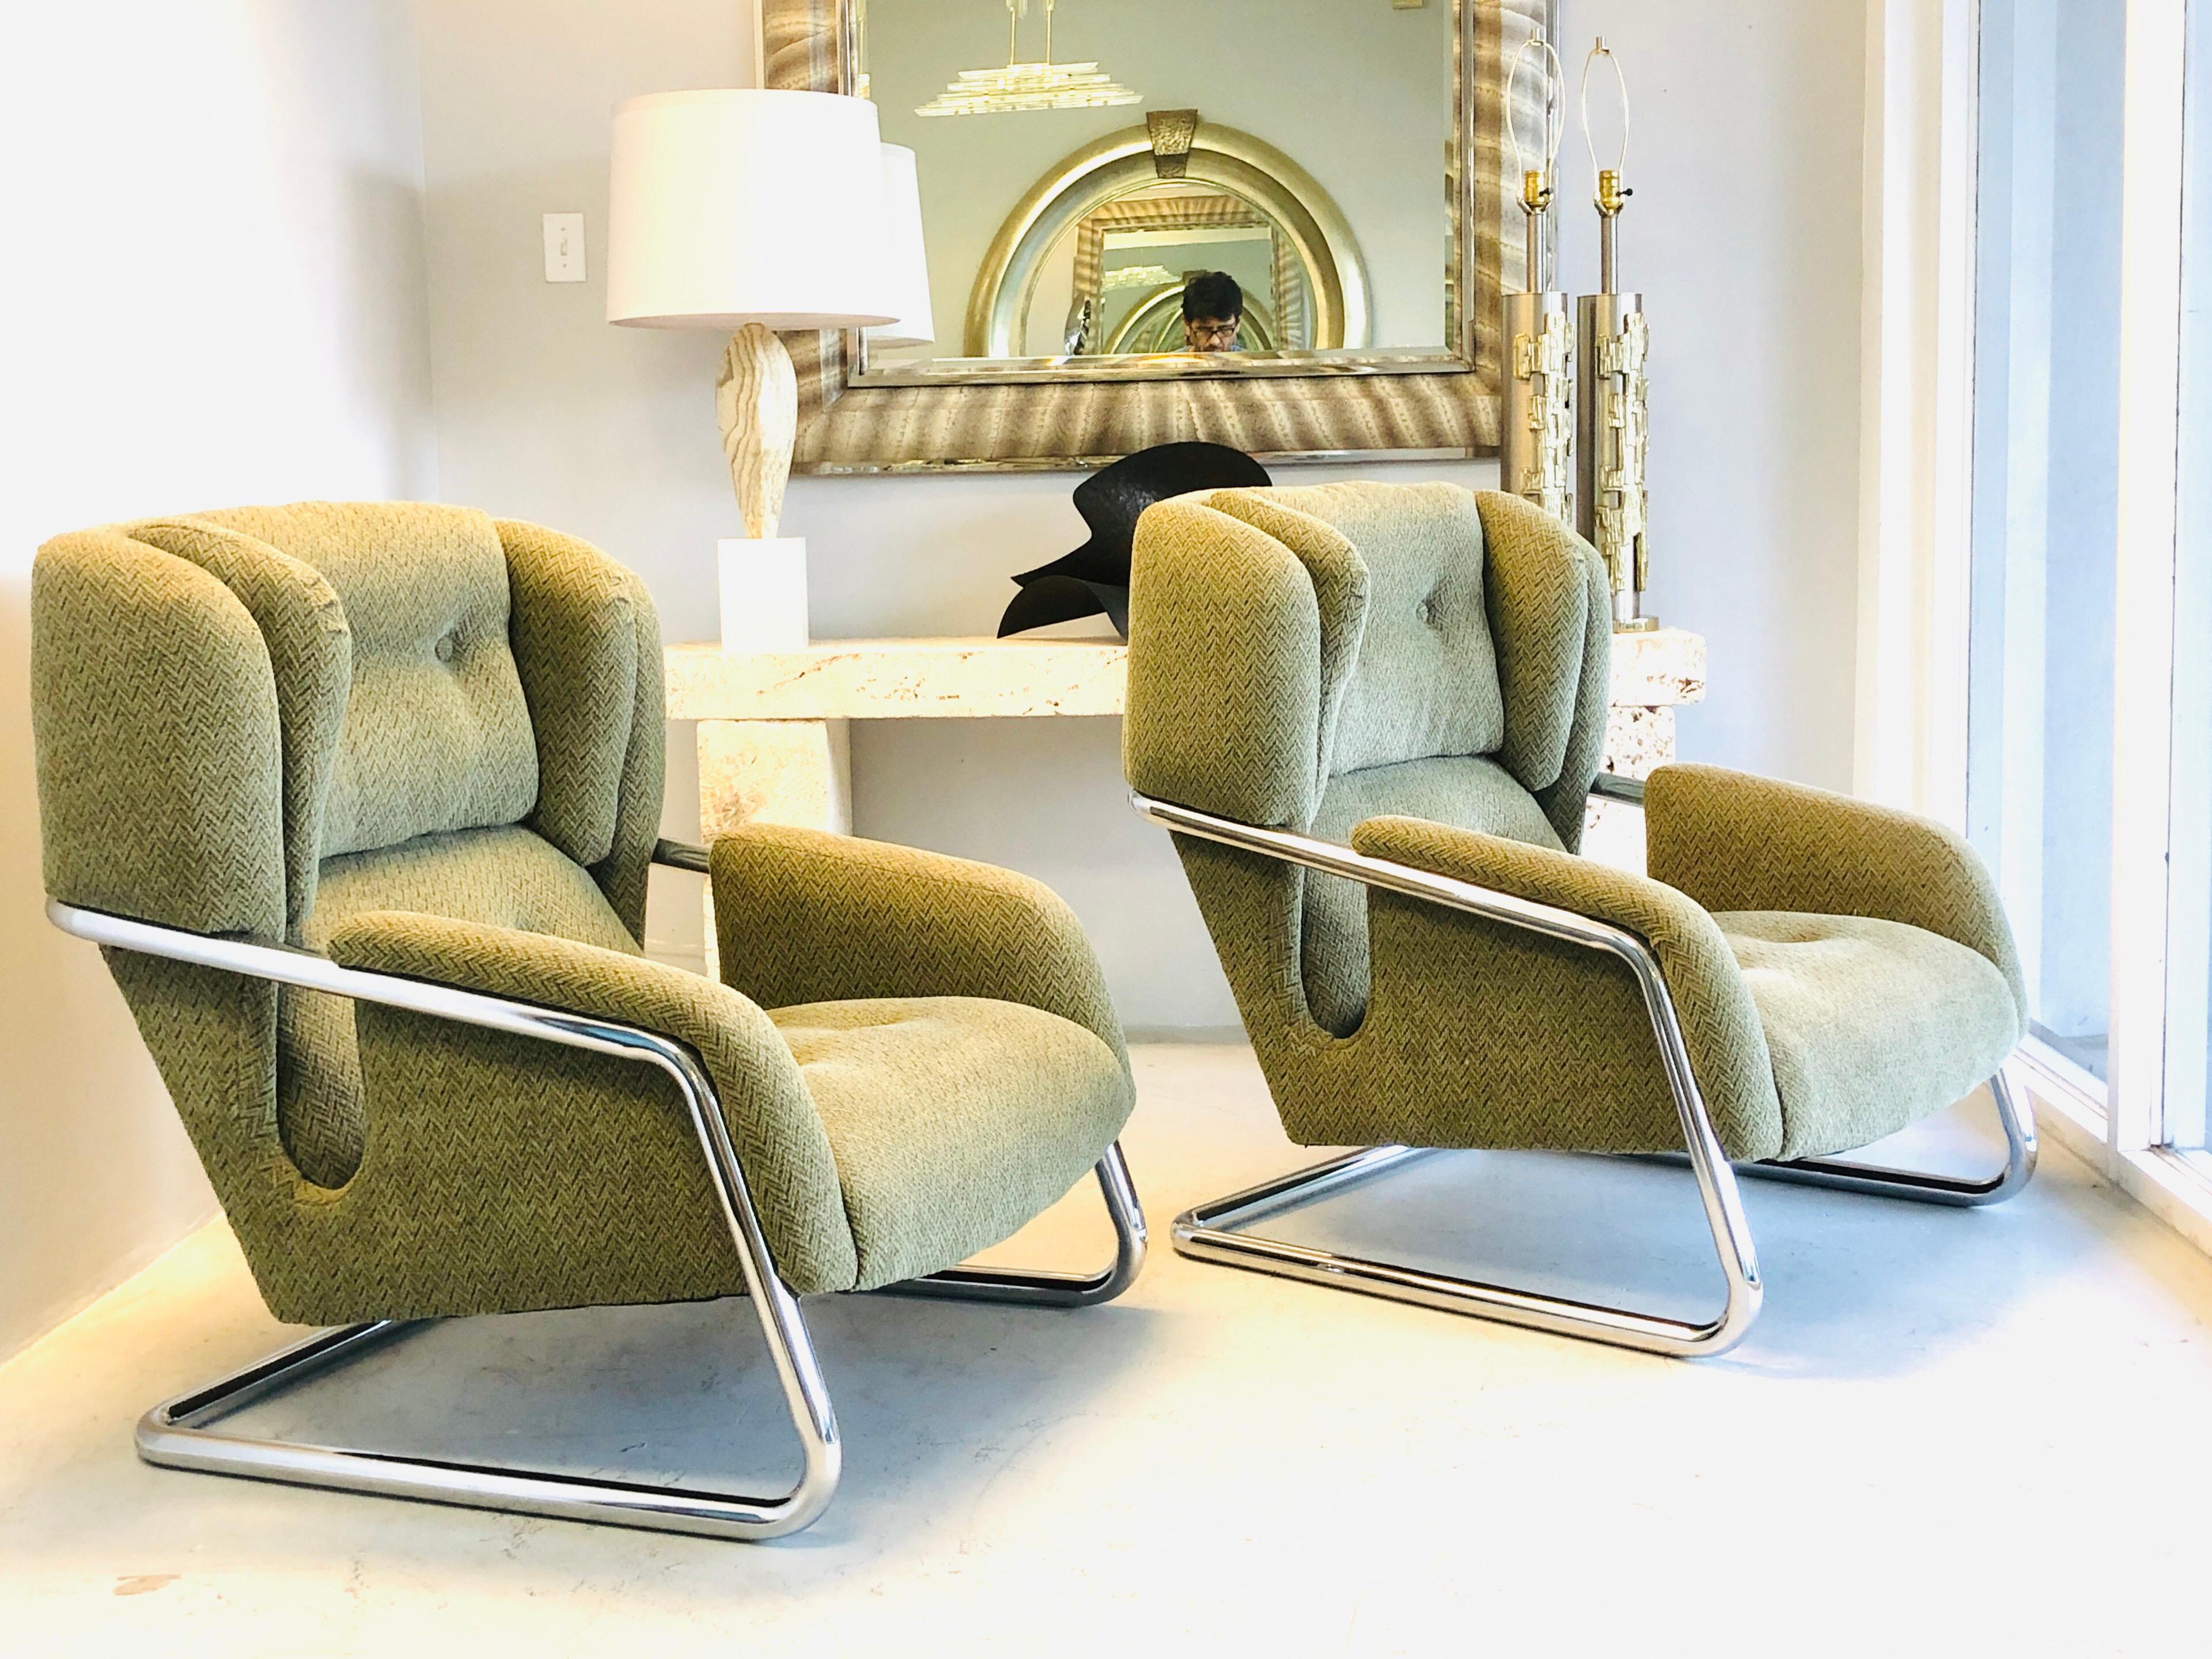 Upholstery Pair of Extraordinary Italian Lounge Club Chairs Cantilevered, Italy, 1970s